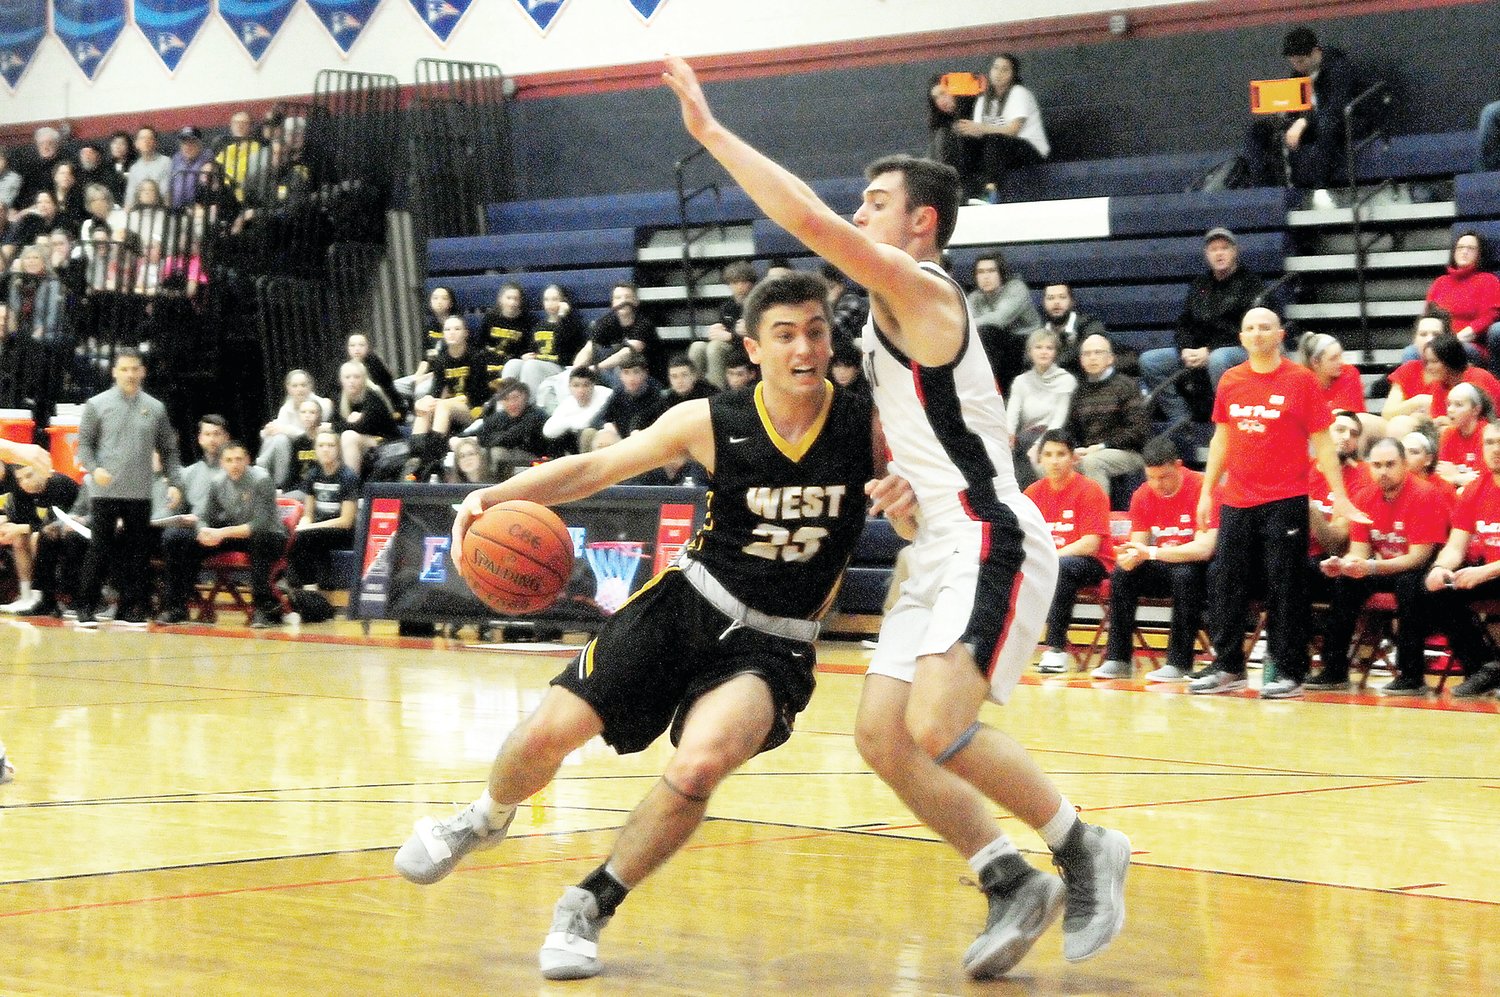 CB West senior Owen Haney, 23, left, drives the ball into the lane defended by CB East junior Joe Jackman in the Patriots’ win over the Bucks Jan. 17 at CB East. Photograph by Steve Sherman.